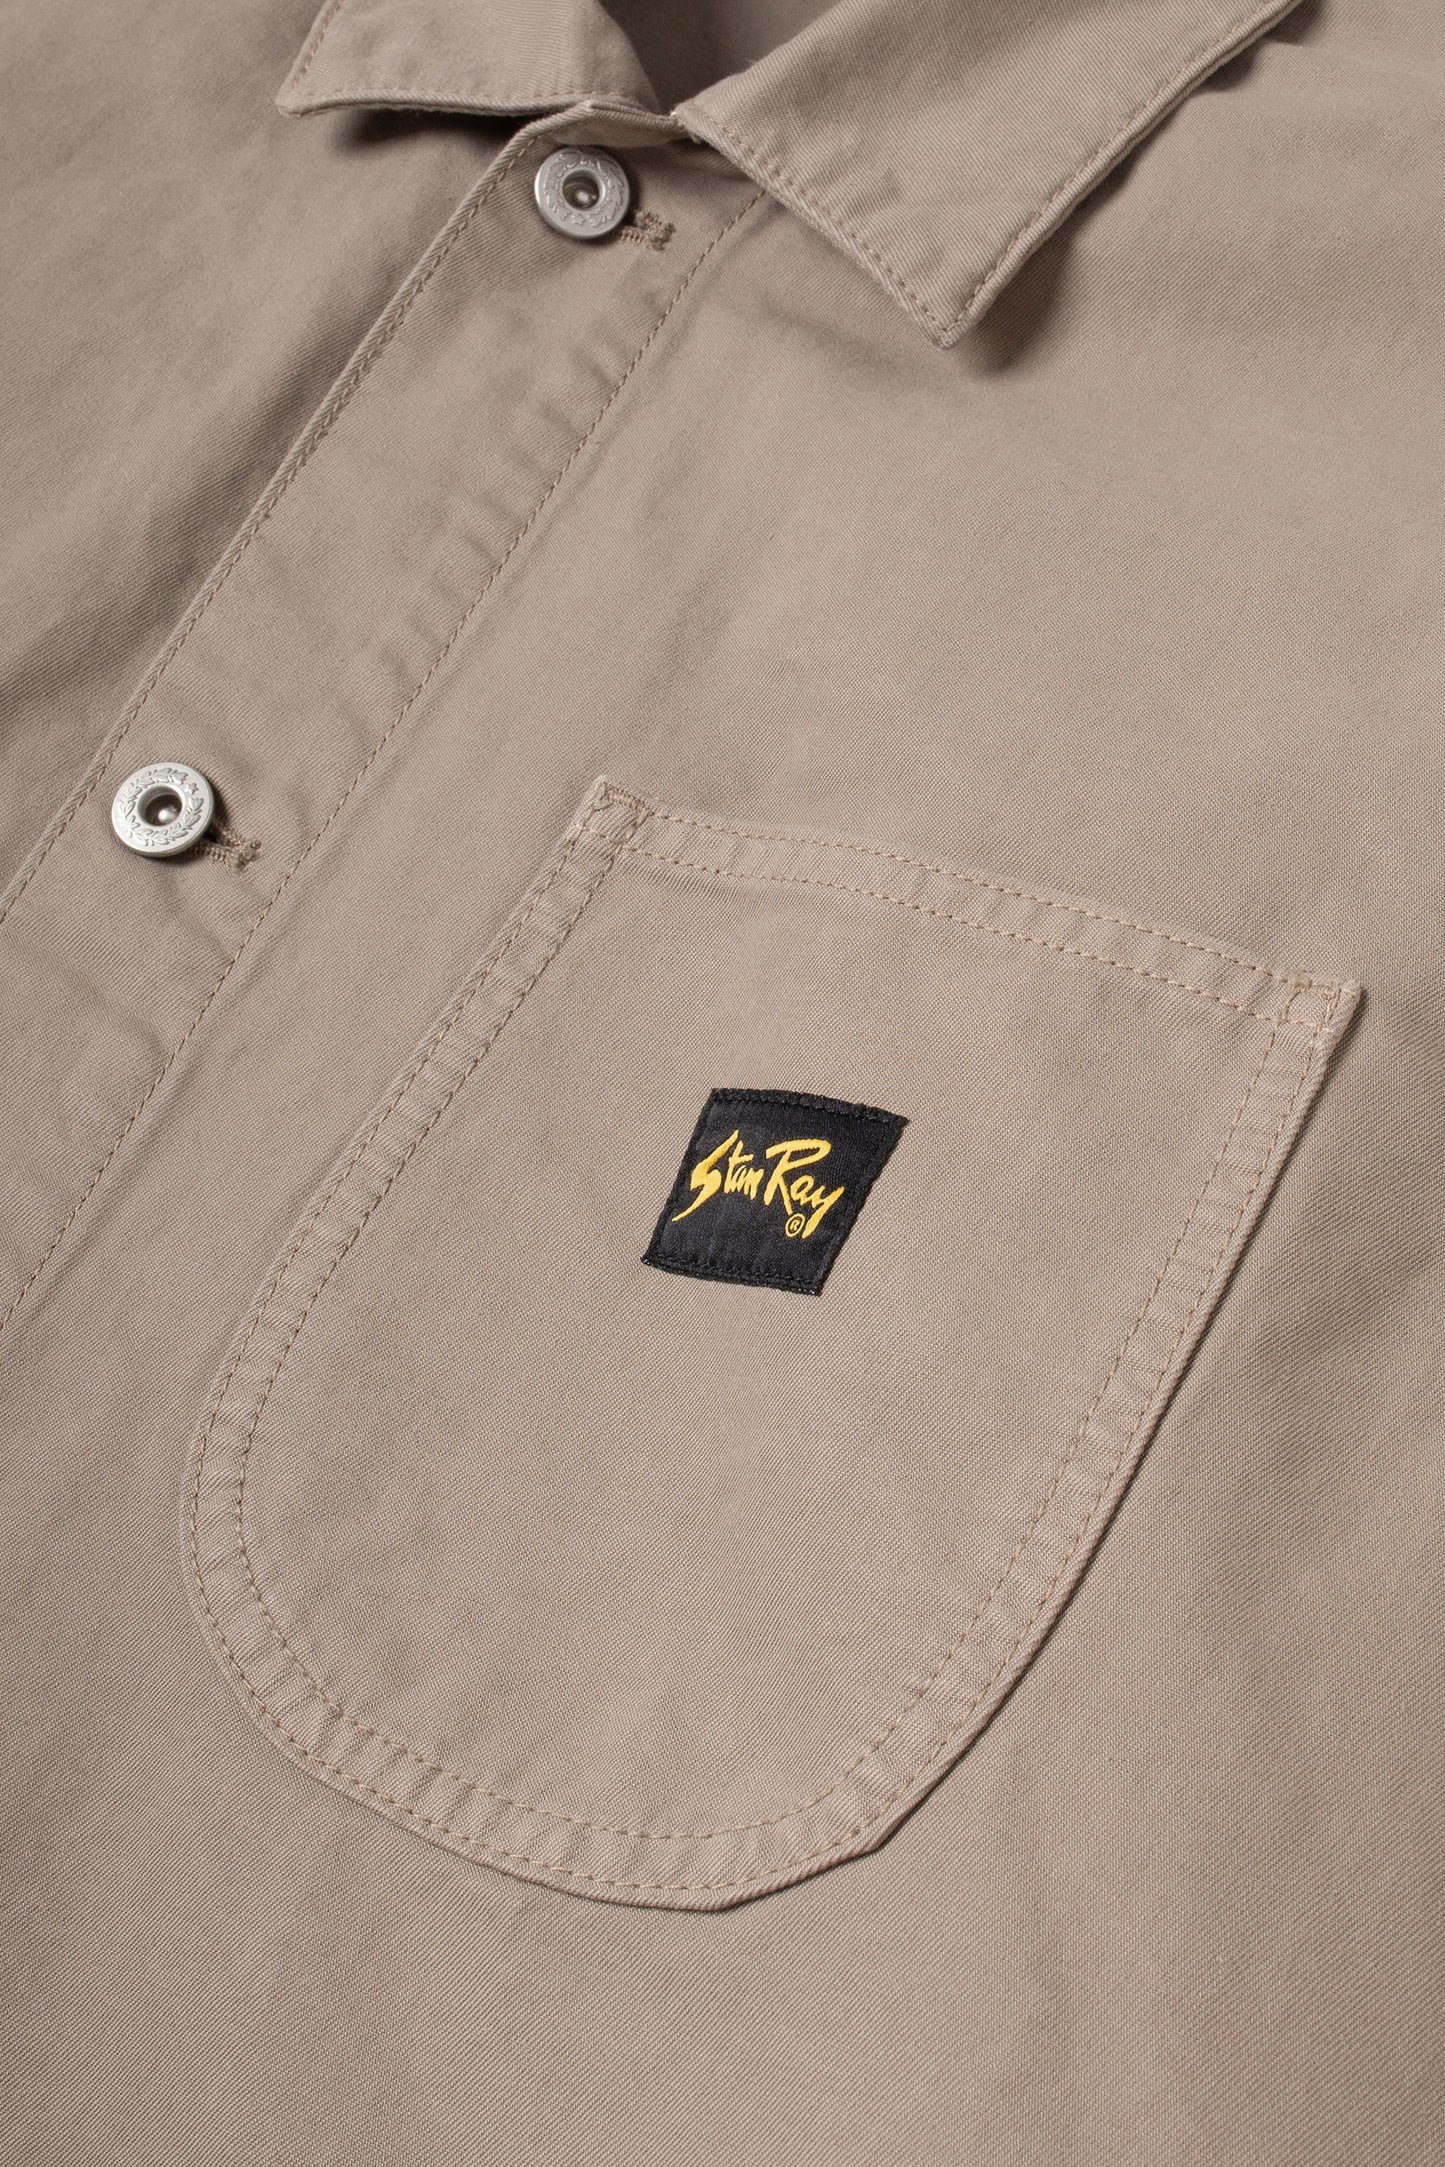 Coverall Jacket (Unlined) (Dusk Twill)